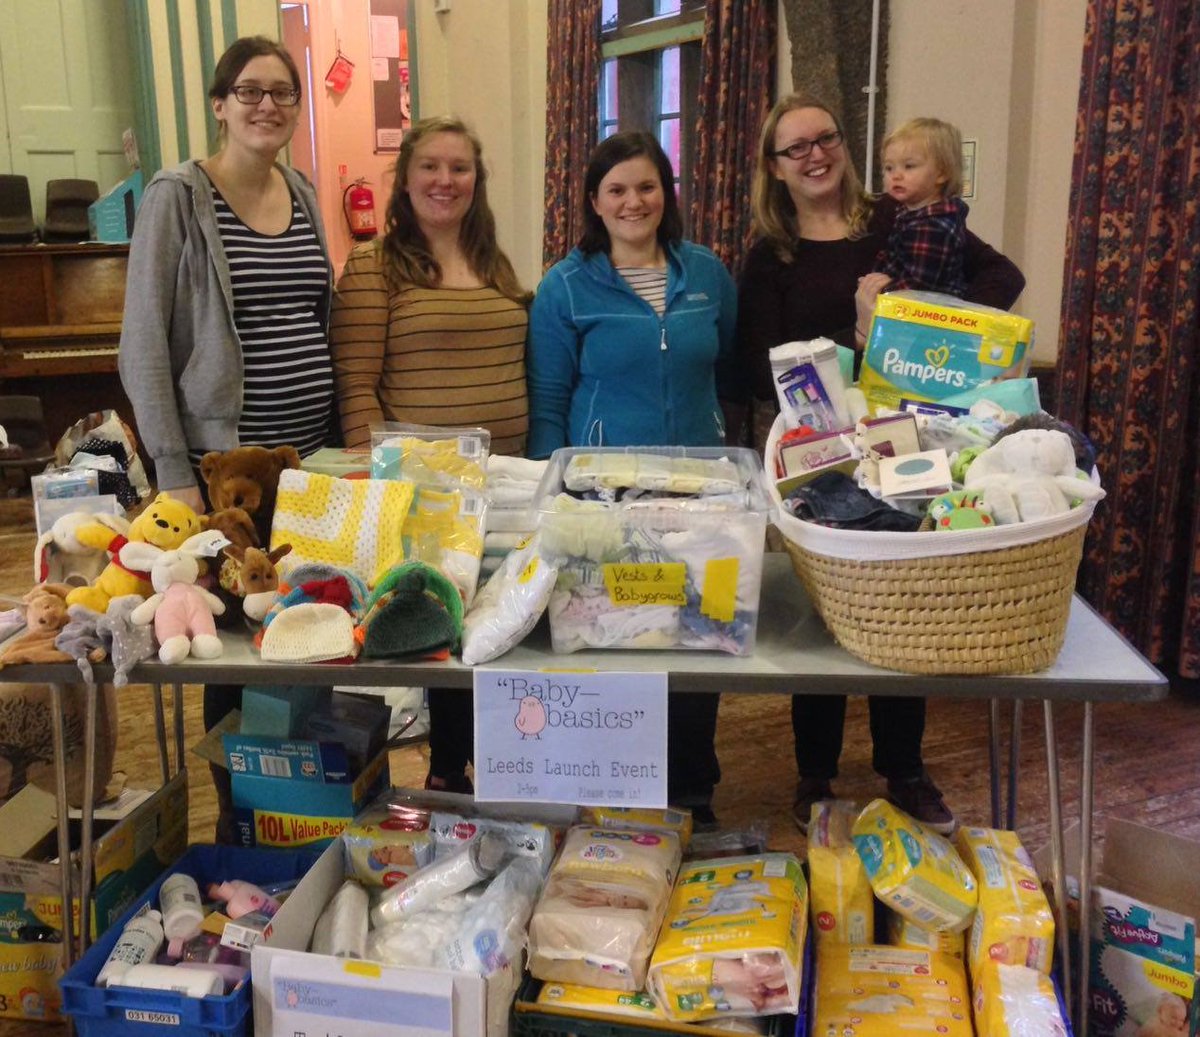 Some #goodnews for once, @BabyBasicsLeeds making a great start. Can you help this #Leeds #charity? @LeedsNews yorkshireeveningpost.co.uk/news/a-helping…